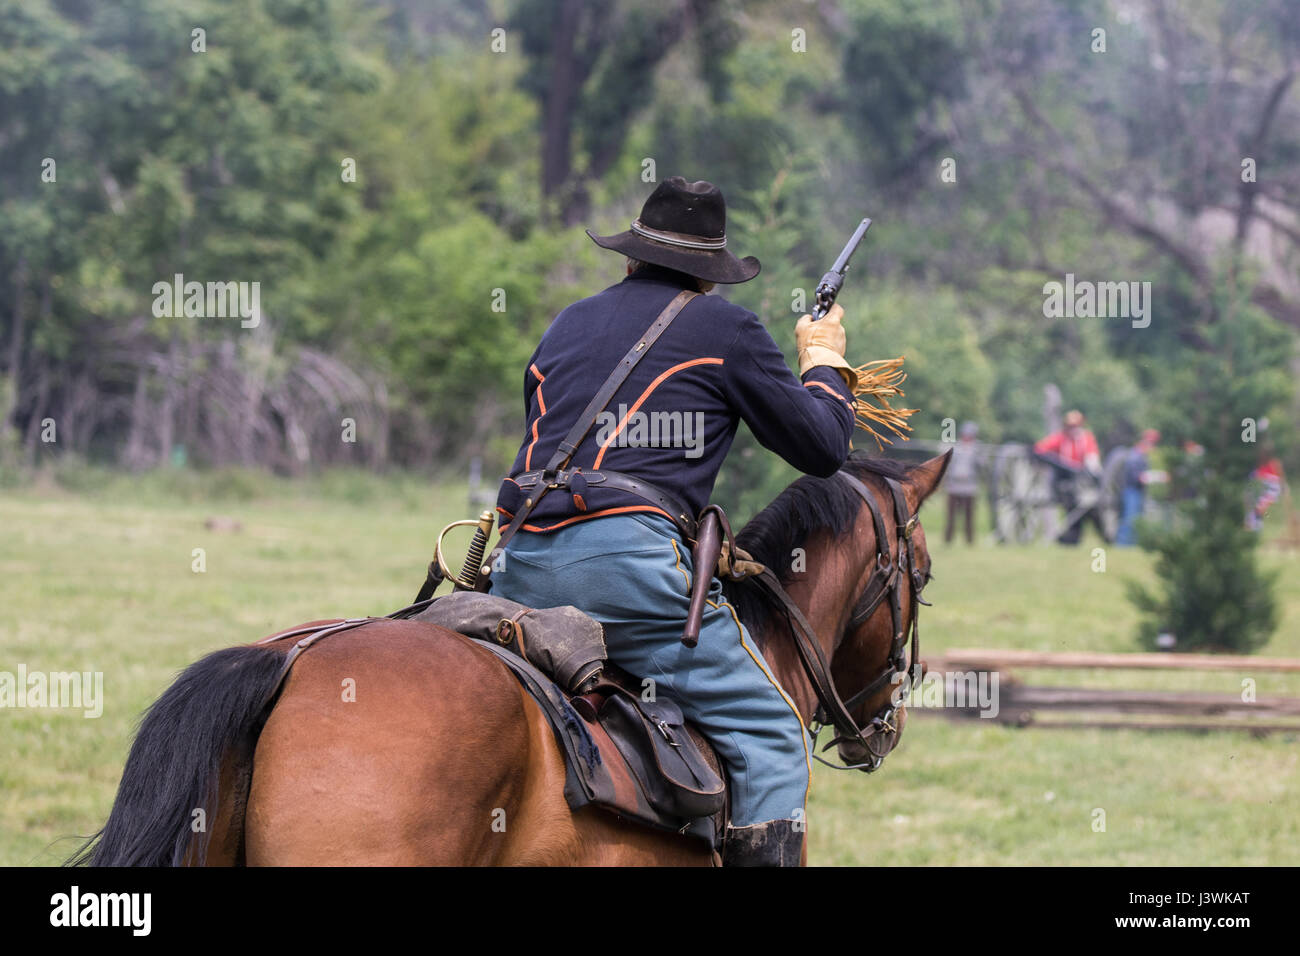 American Civil War action at the Dog Island  Reenactment in Red Bluff,  California. Stock Photo